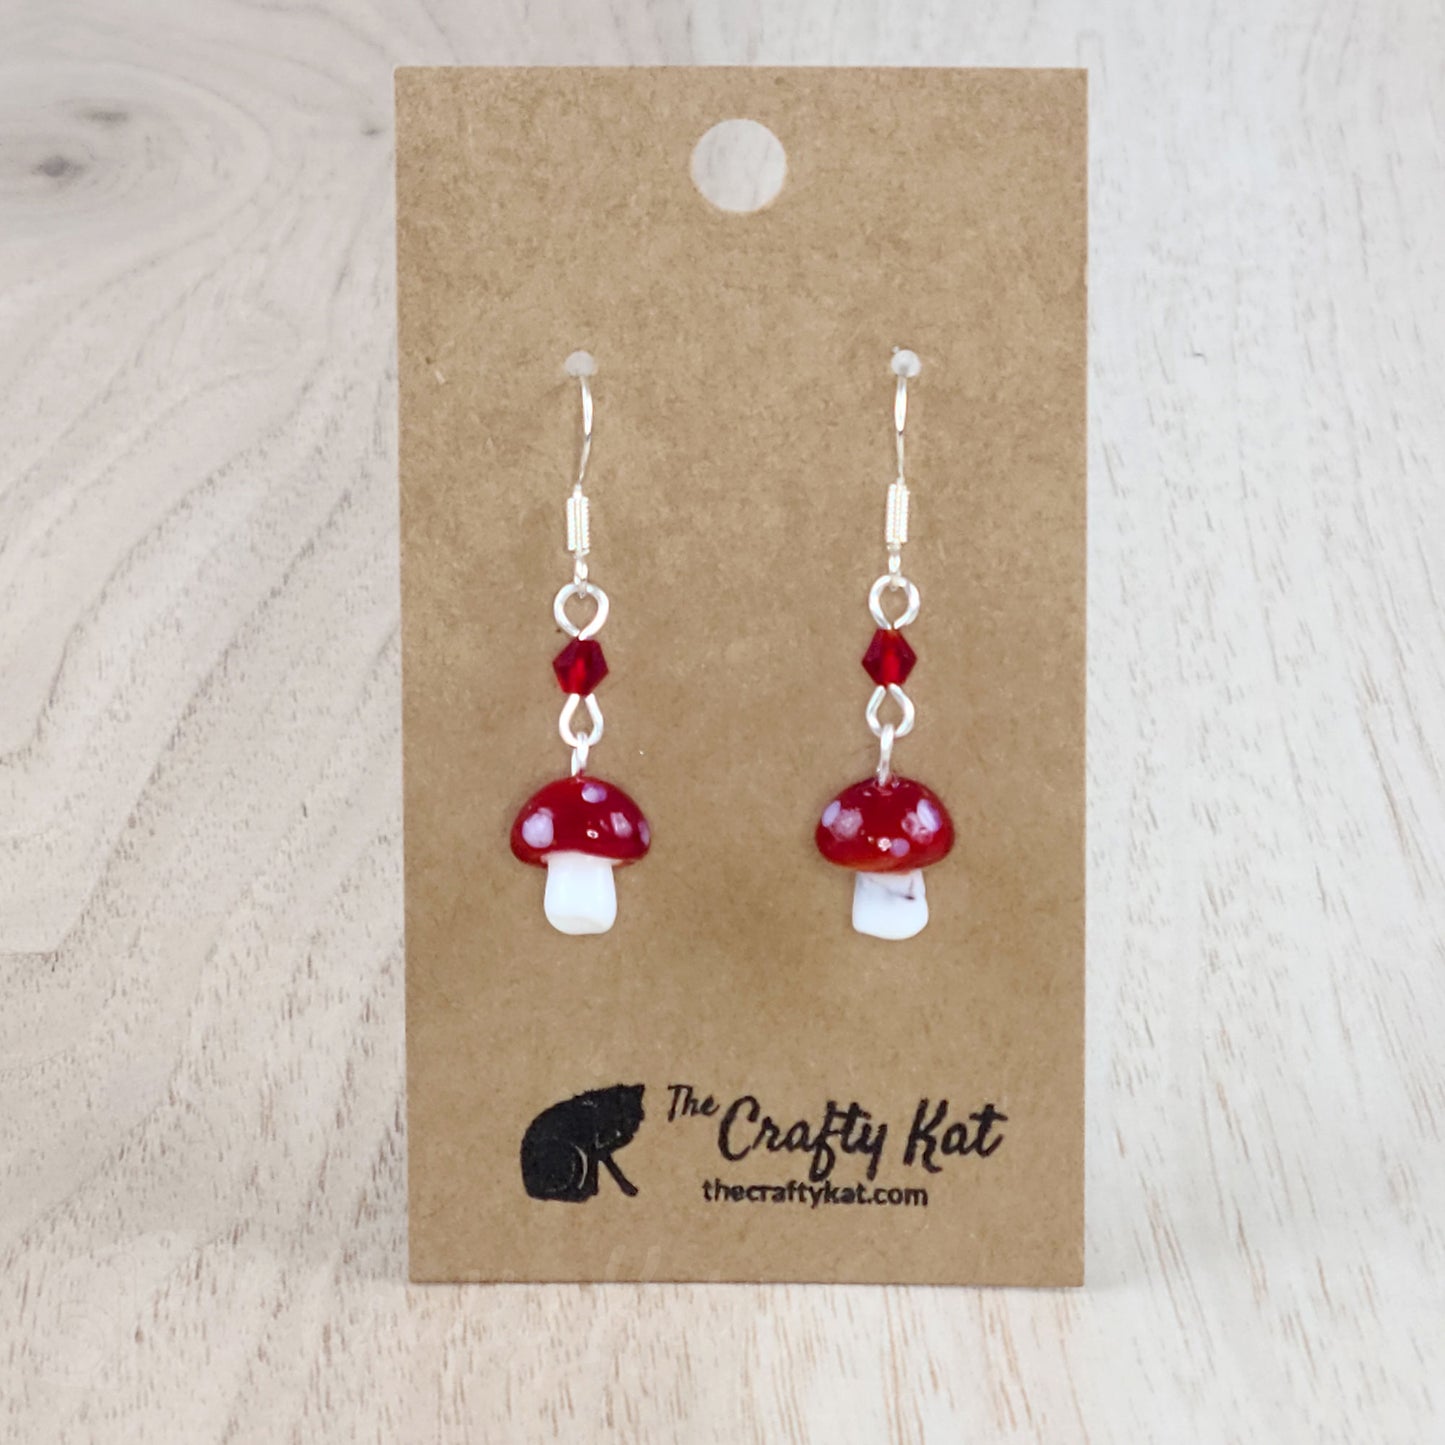 Mushroom-shaped tiered earrings made of lampwork and pressed glass beads with silver-plated base metal fittings. These mushrooms are red with white spots.